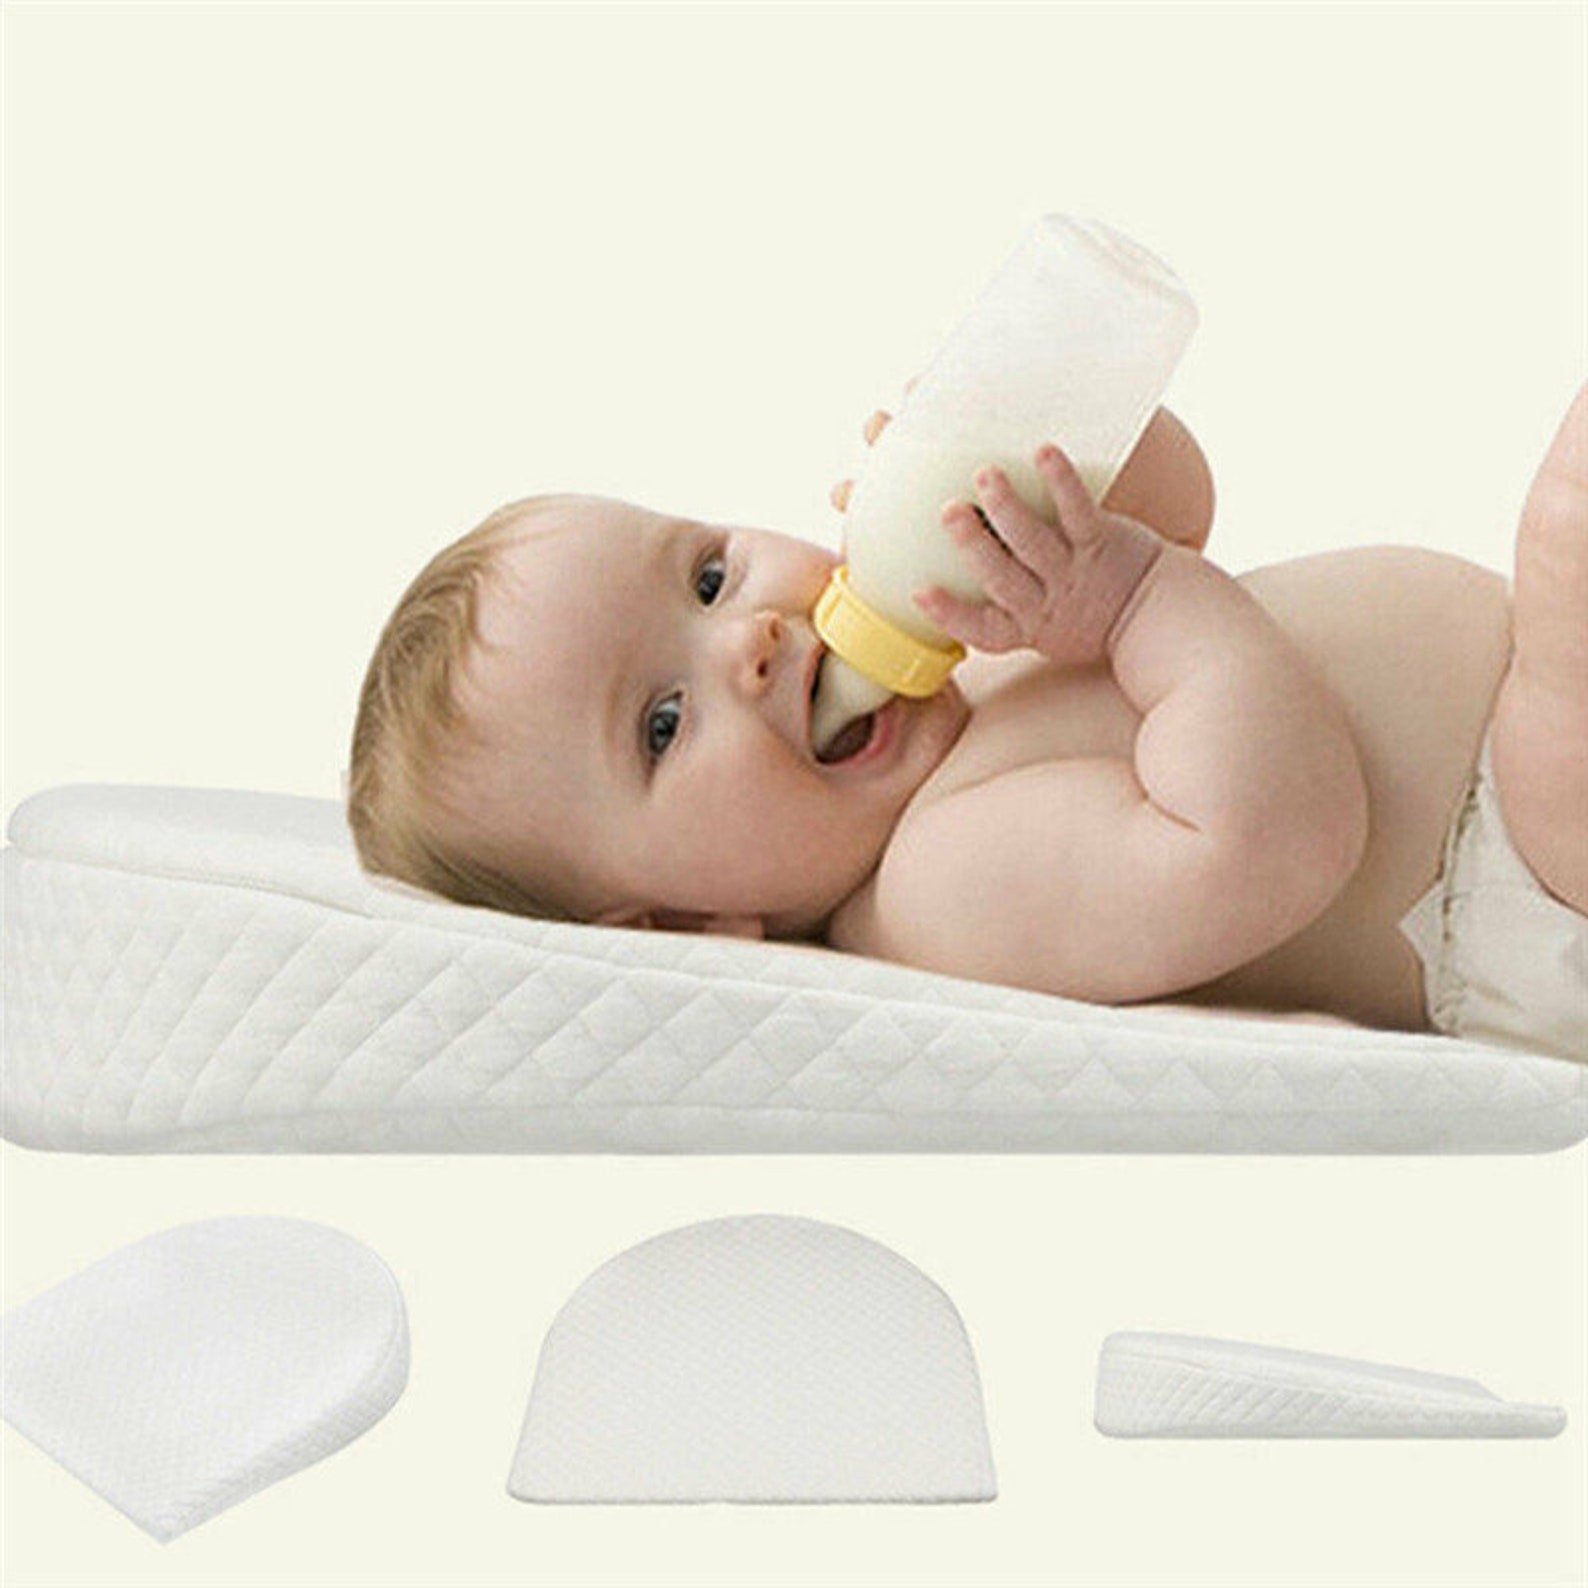 Baby Wedge Pillow Colic Congestion Anti Reflux Universal ...